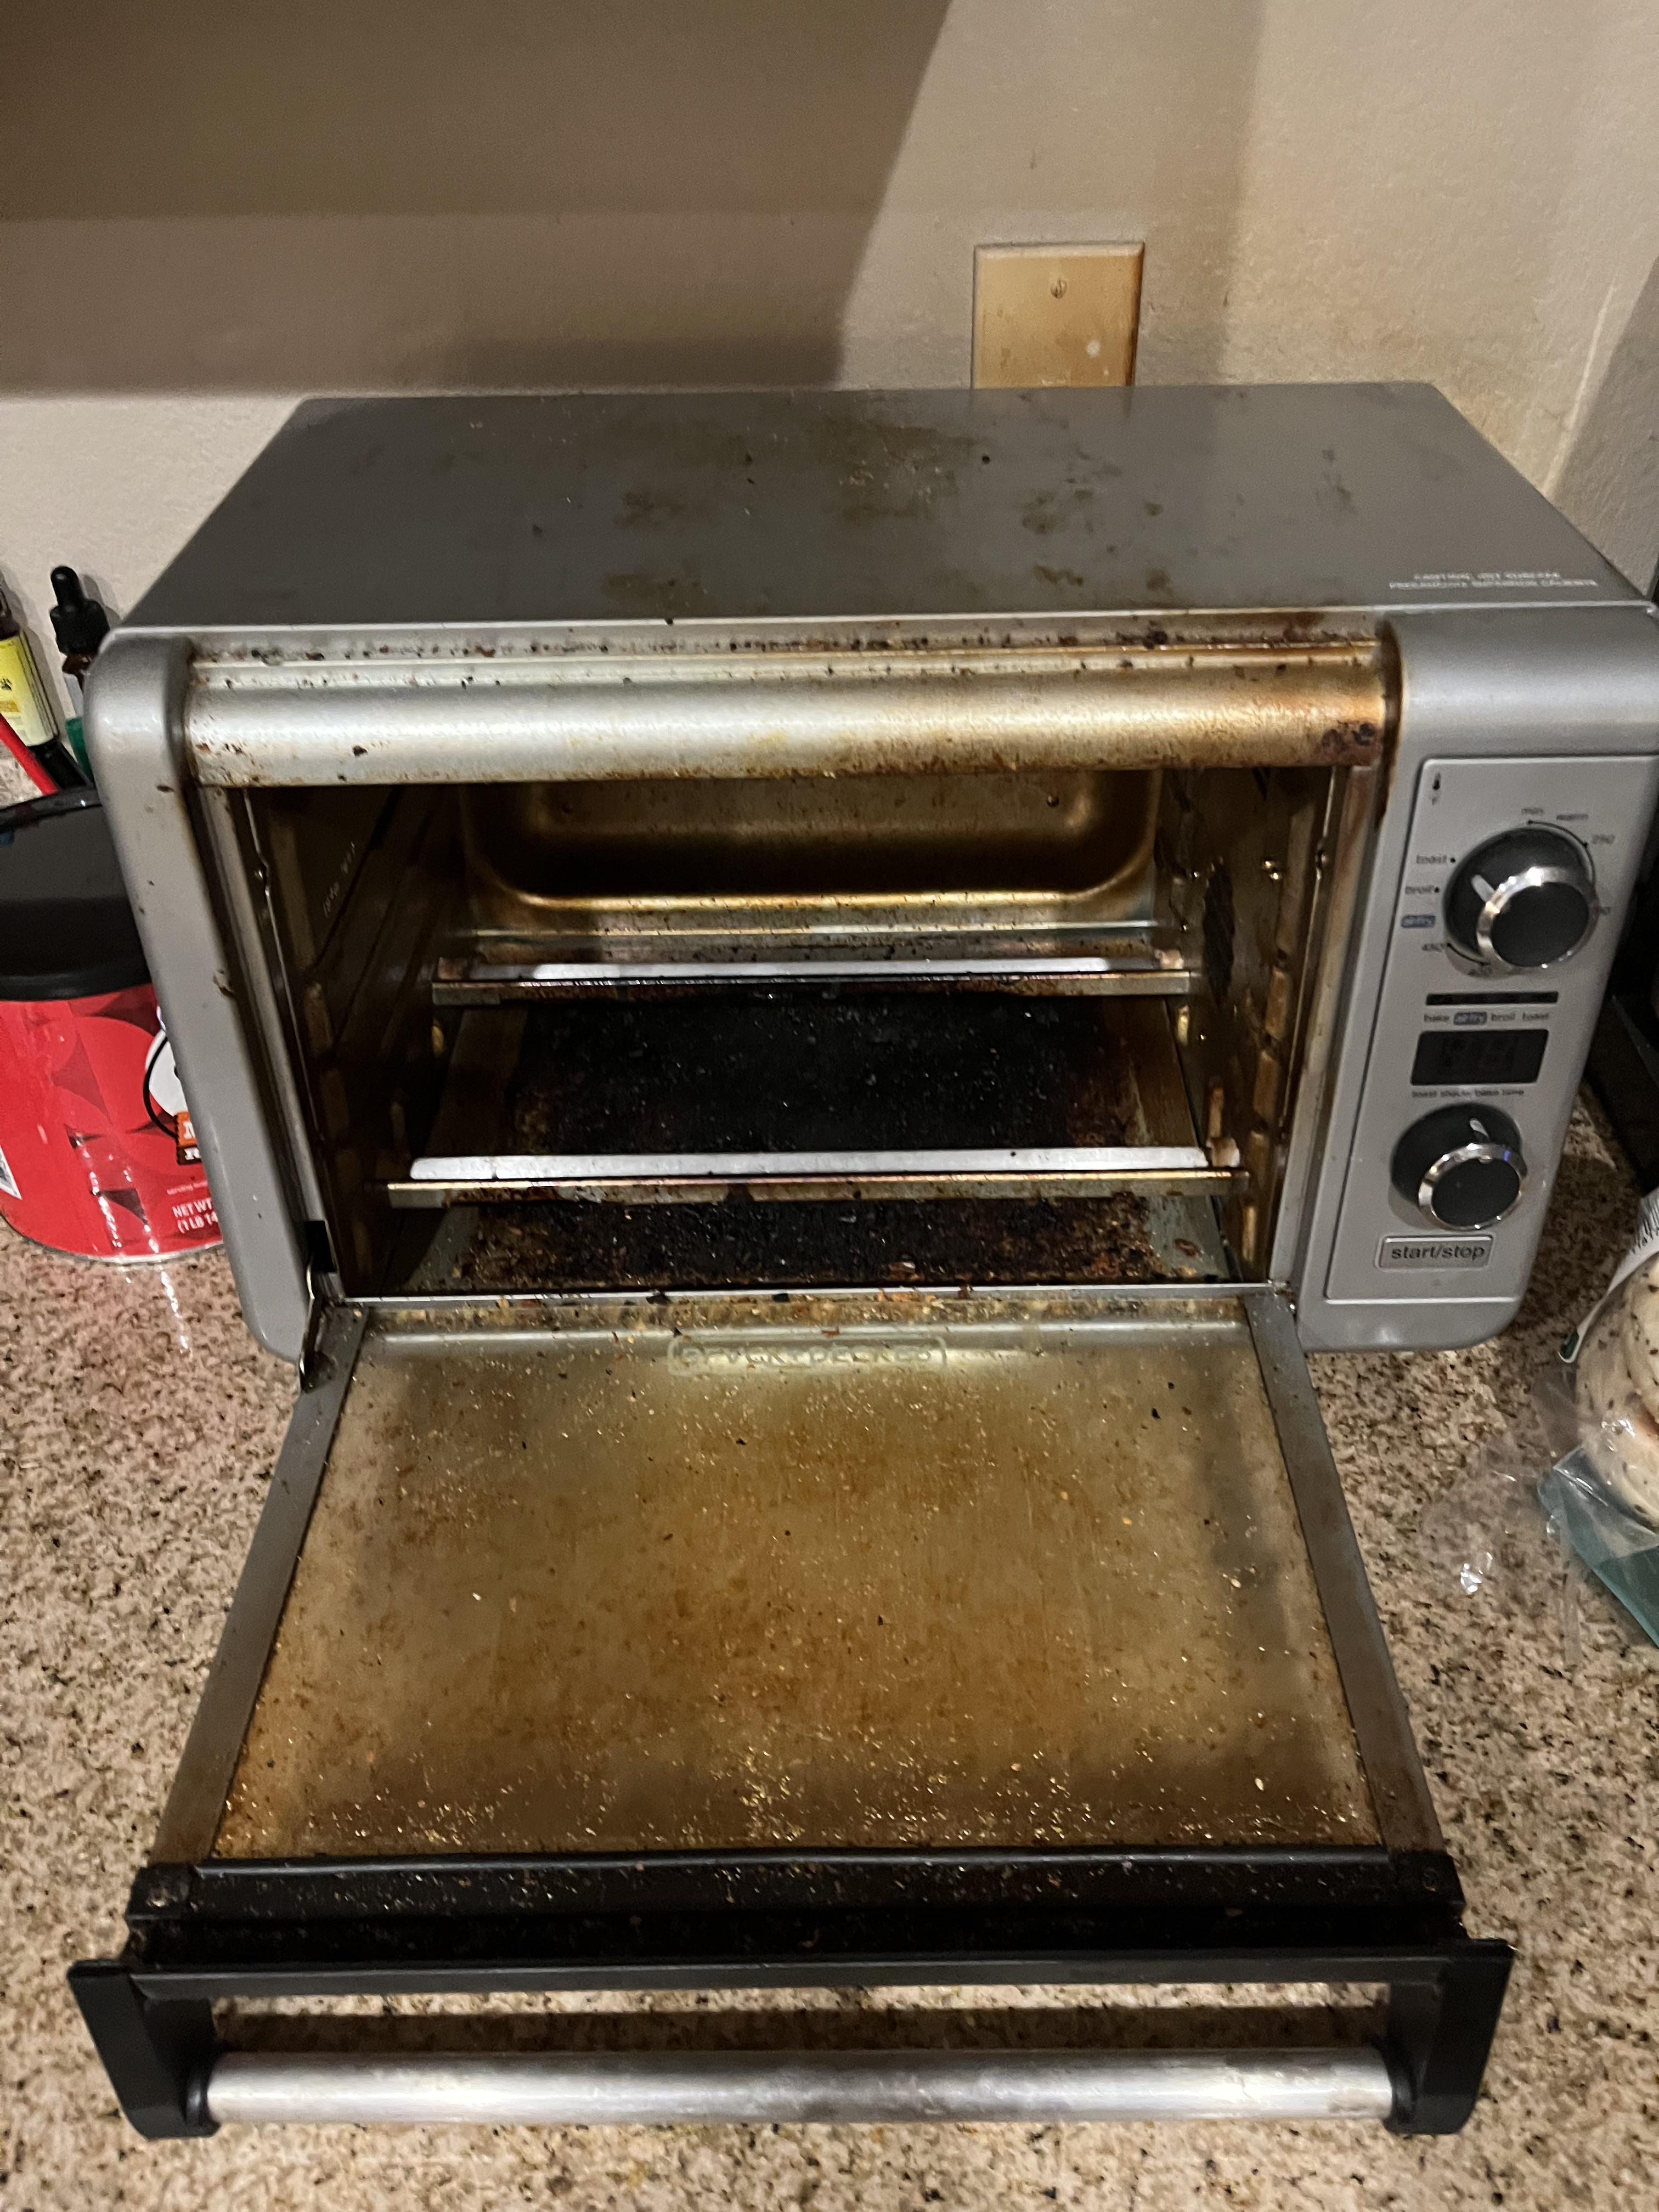 A Small Dirty Oven